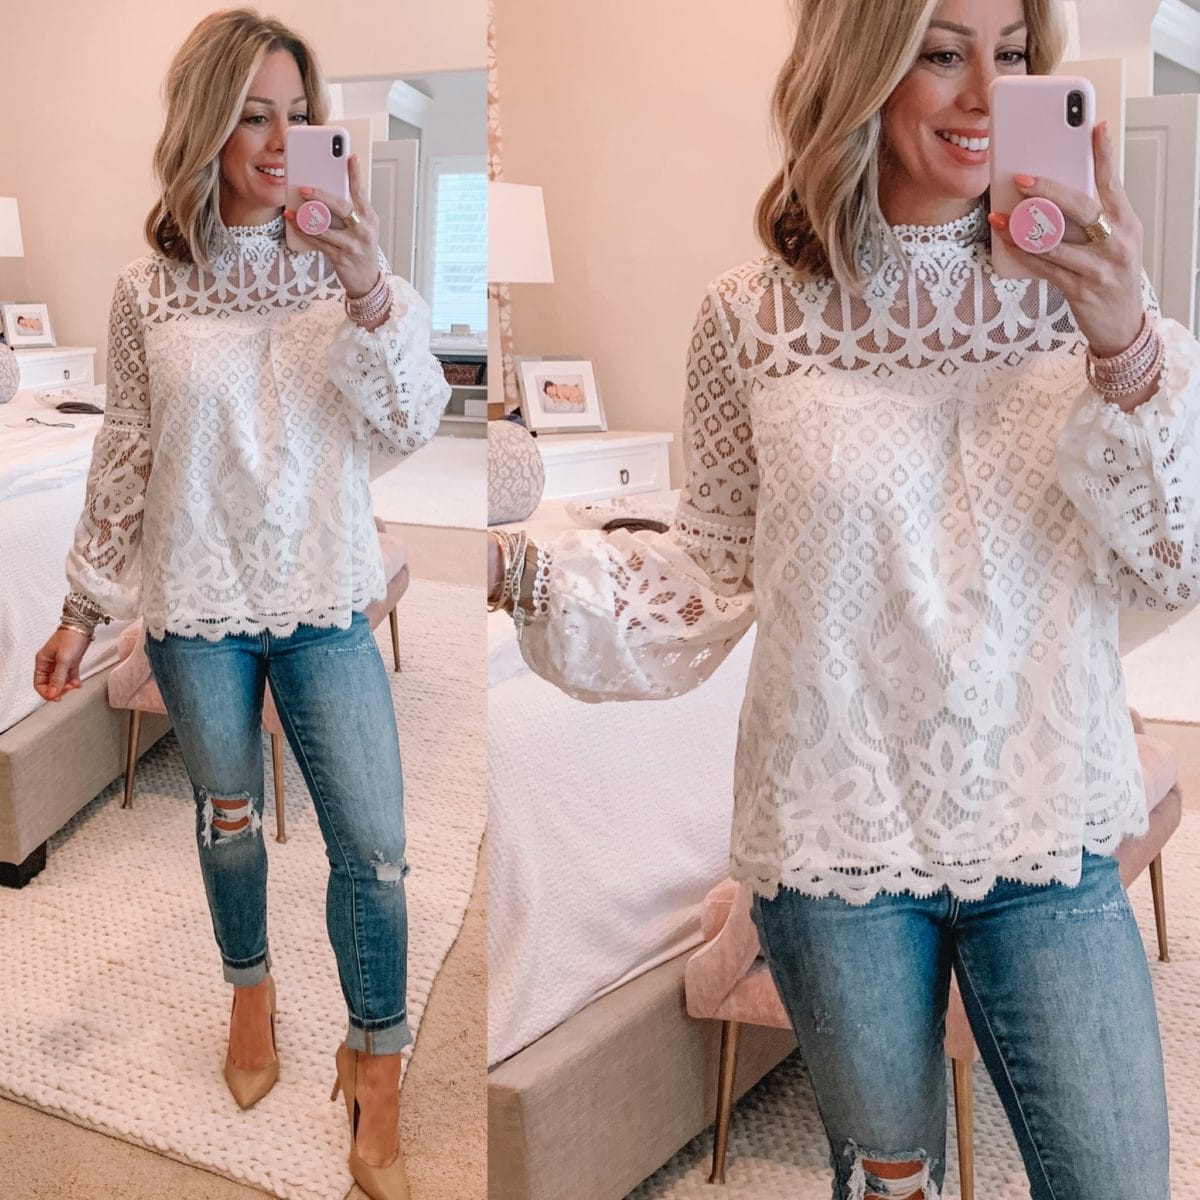 White Lace Top, Distressed Jeans, Nude Heels